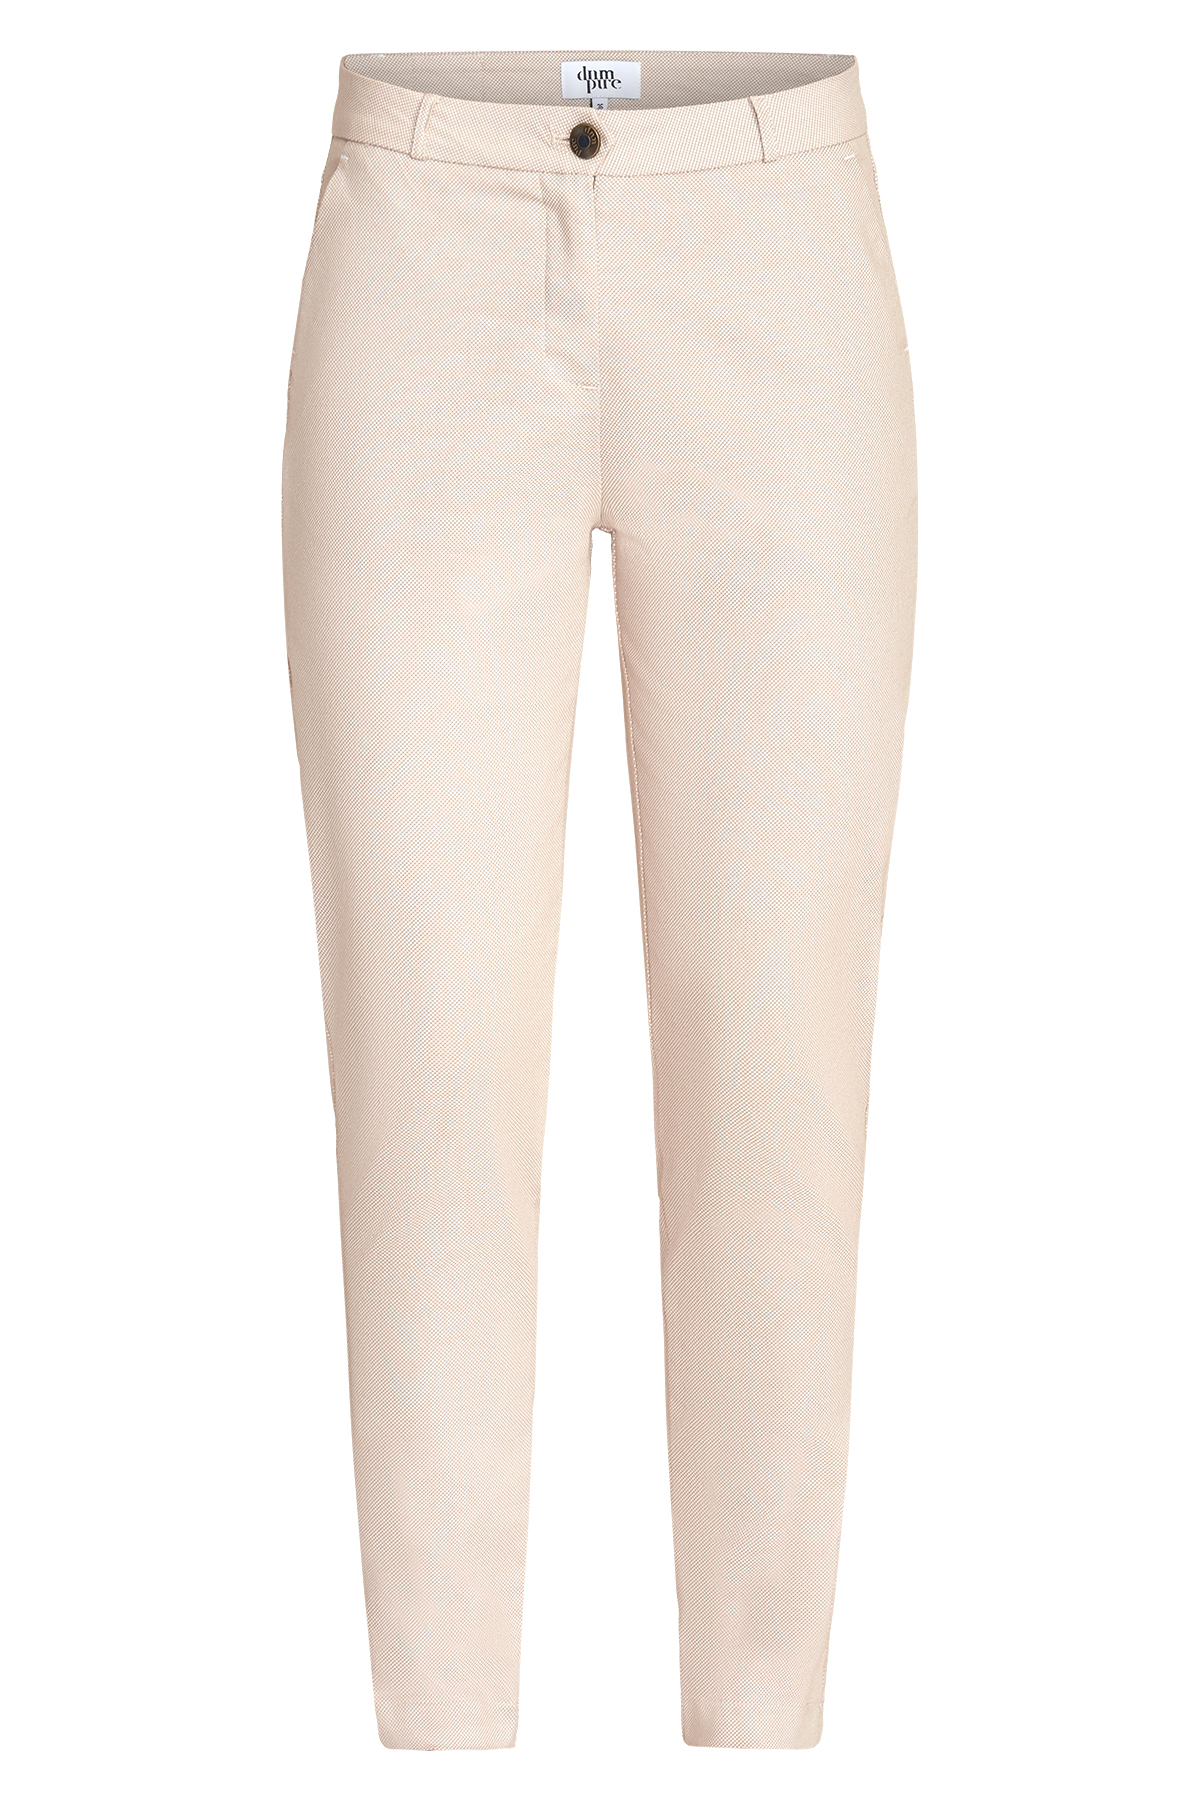 DNM PURE BY ZIZO Broek Chloe Cropped Sand White Dots